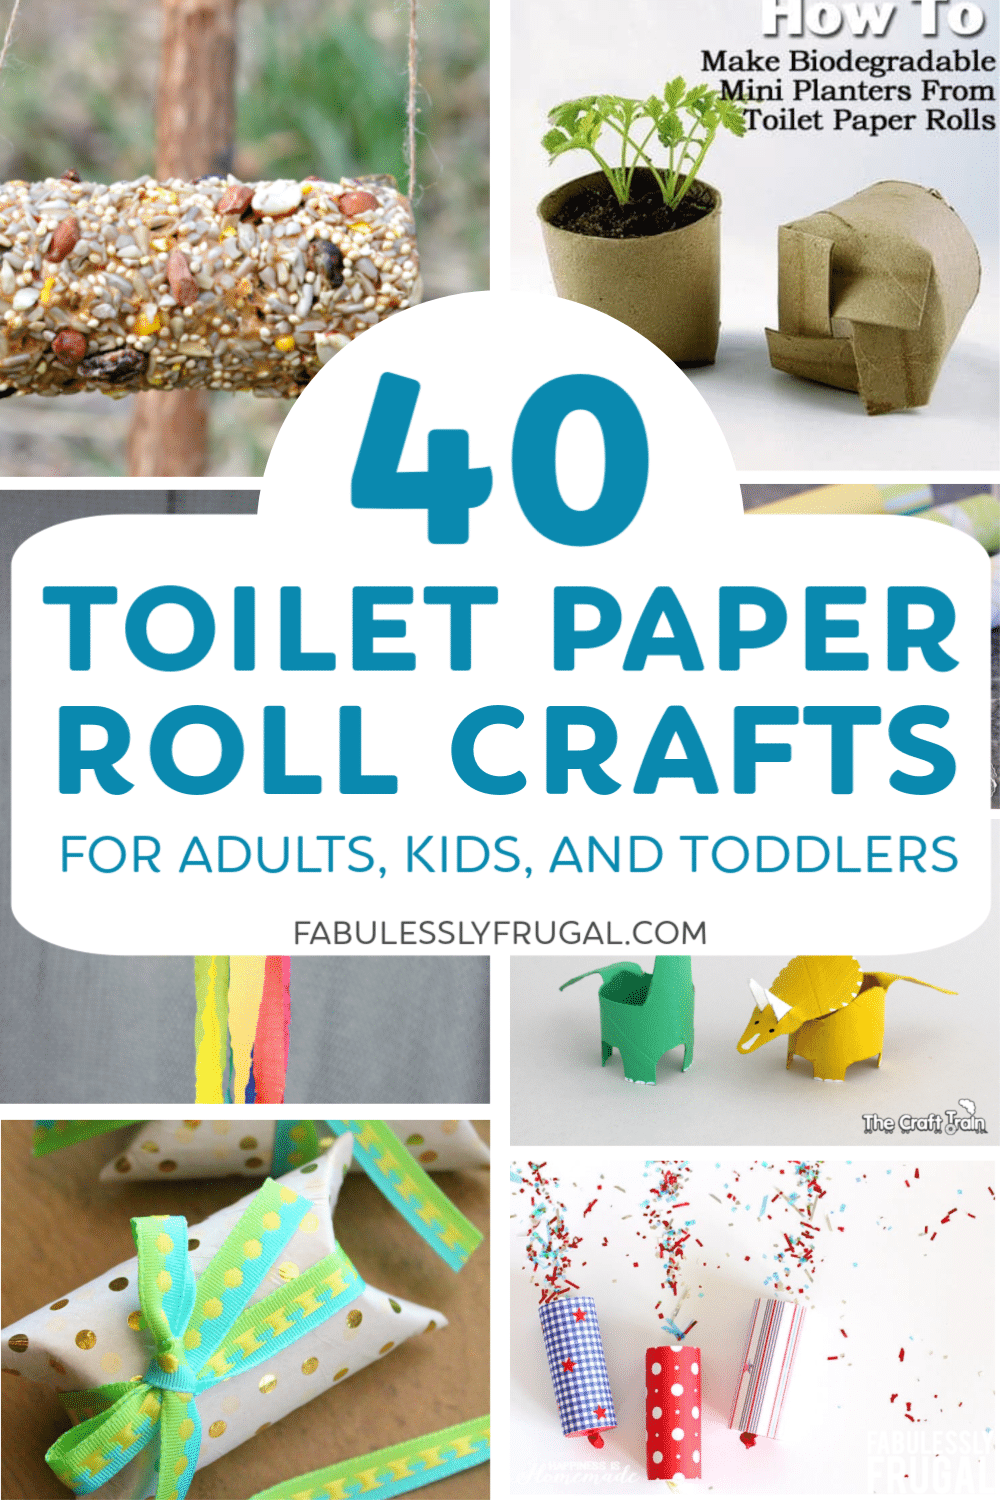 Toilet paper roll crafts for adults